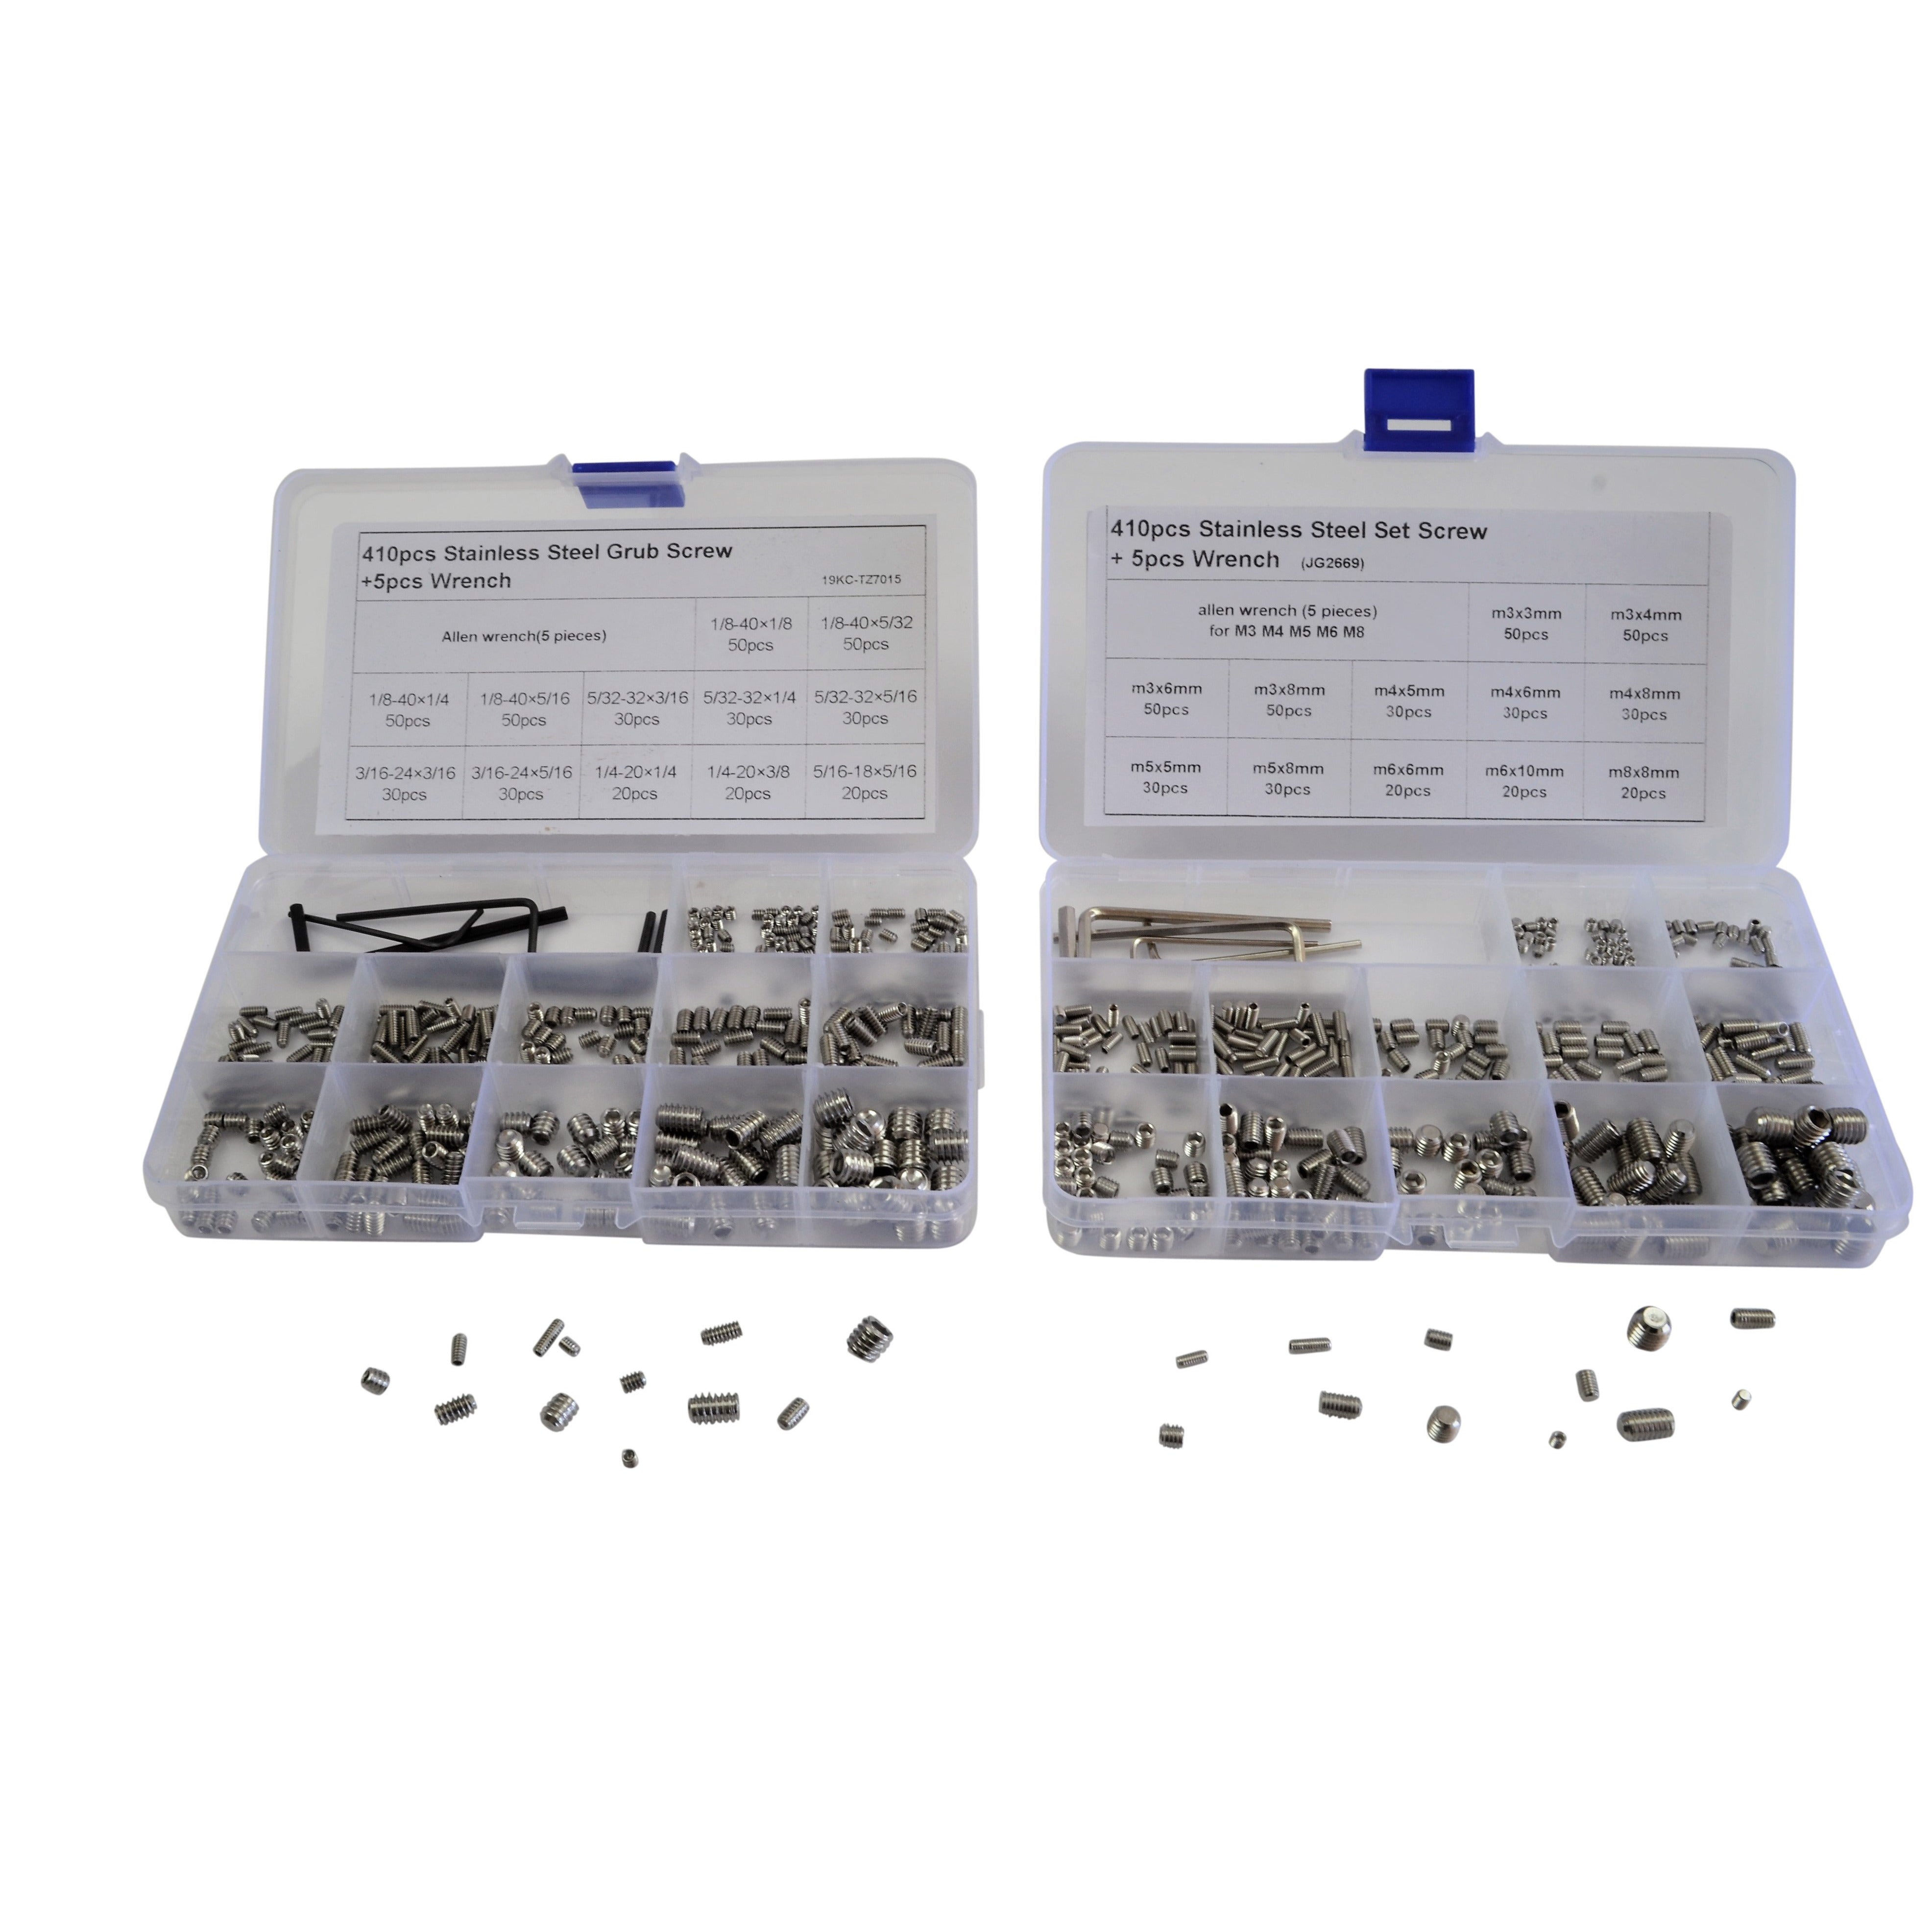 820 pc Stainless Steel Metric and Imperial Grub Set Grab Kit Assortment